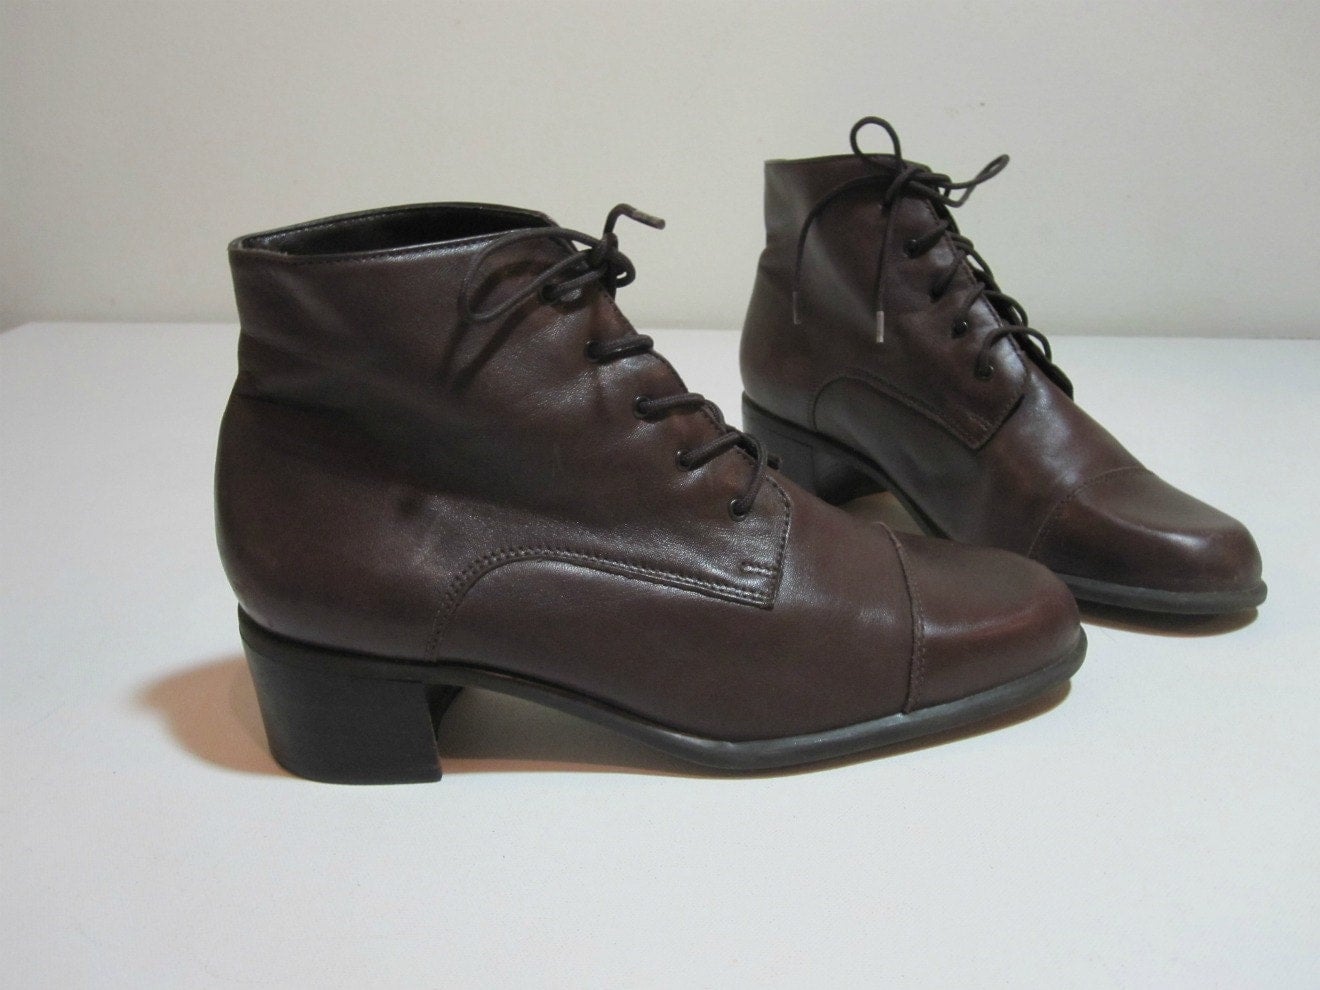 Vintage Brown Leather Ankle Granny Boots Size 7 Lace Up